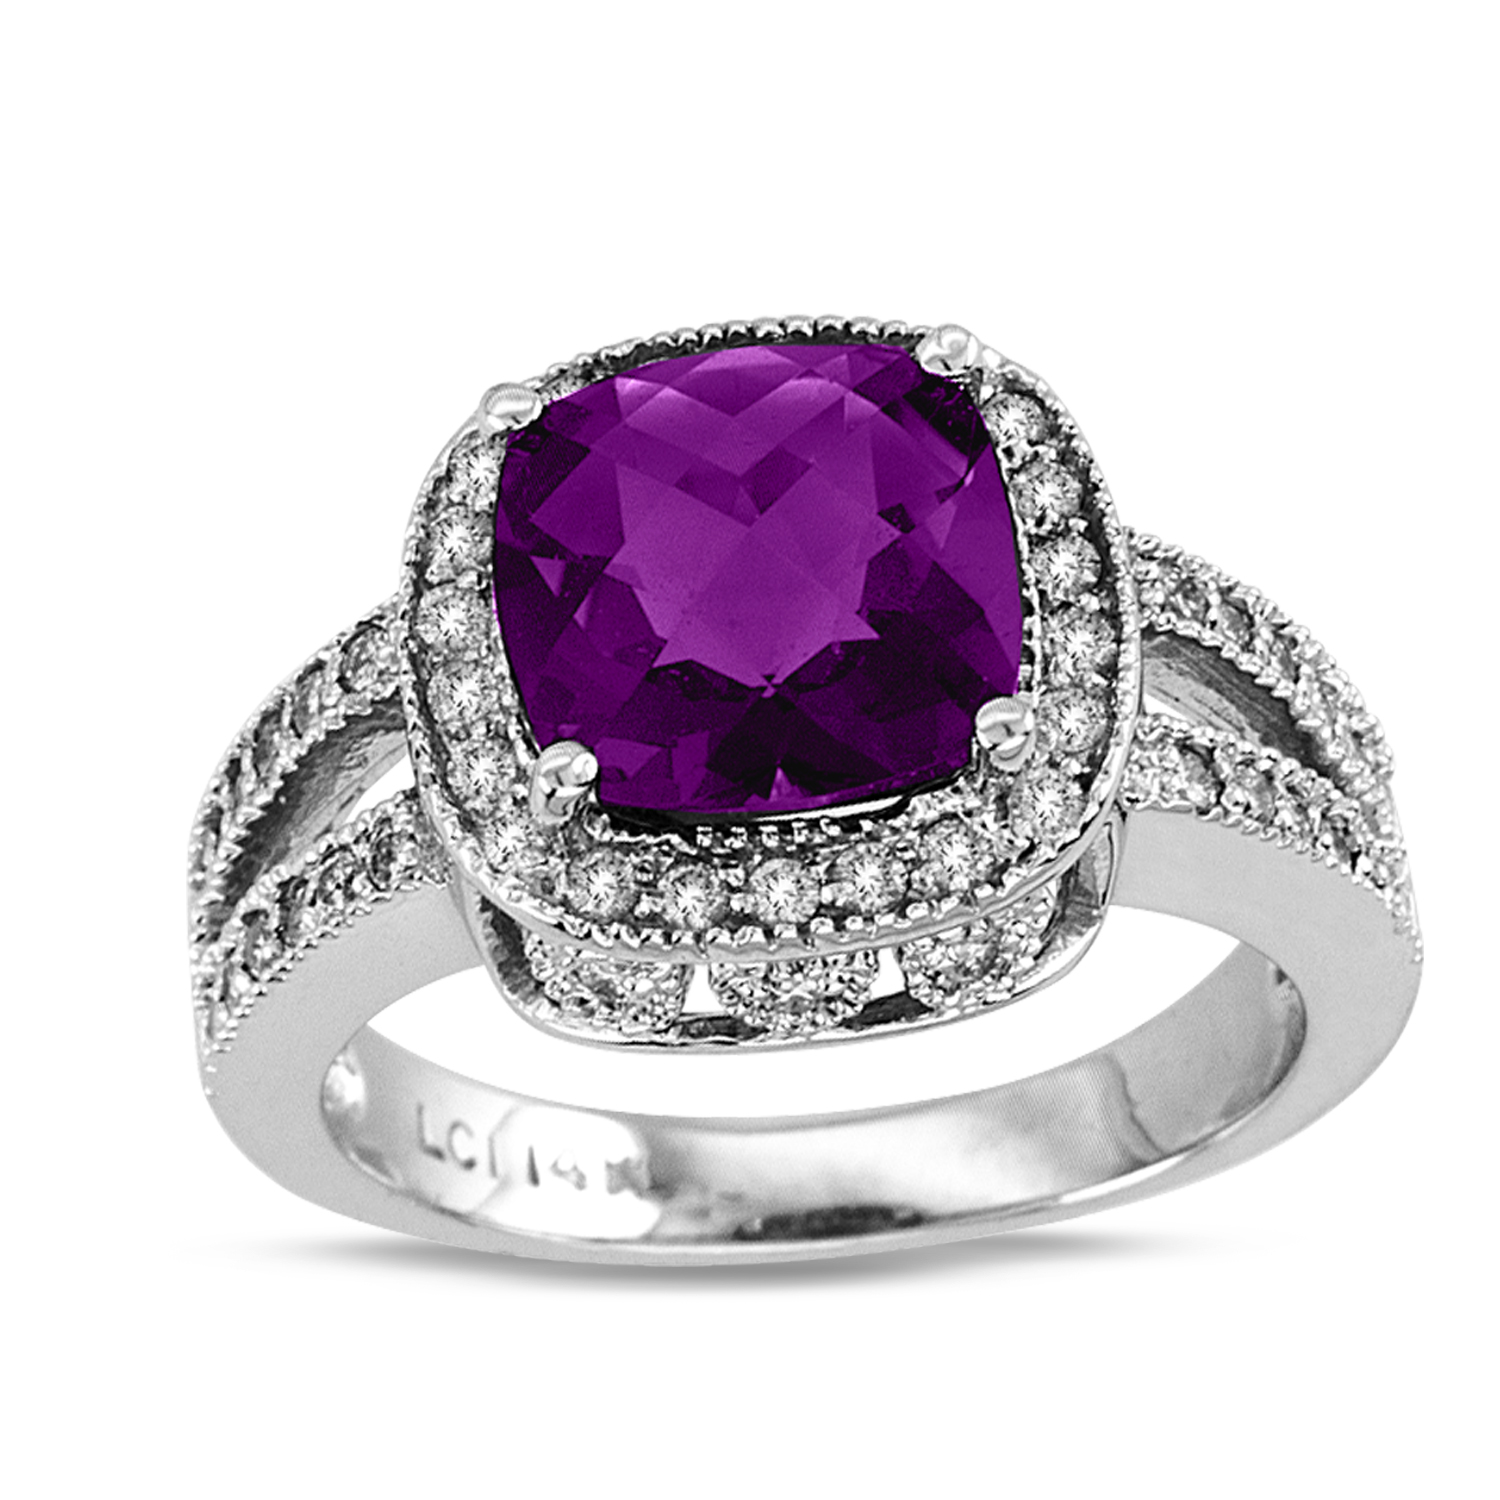 14k Gold Split Shank Ring with 0.50ct tw of Round Diamonds and 9mm Checkerboard Cushion Cut Amethyst Center Stone